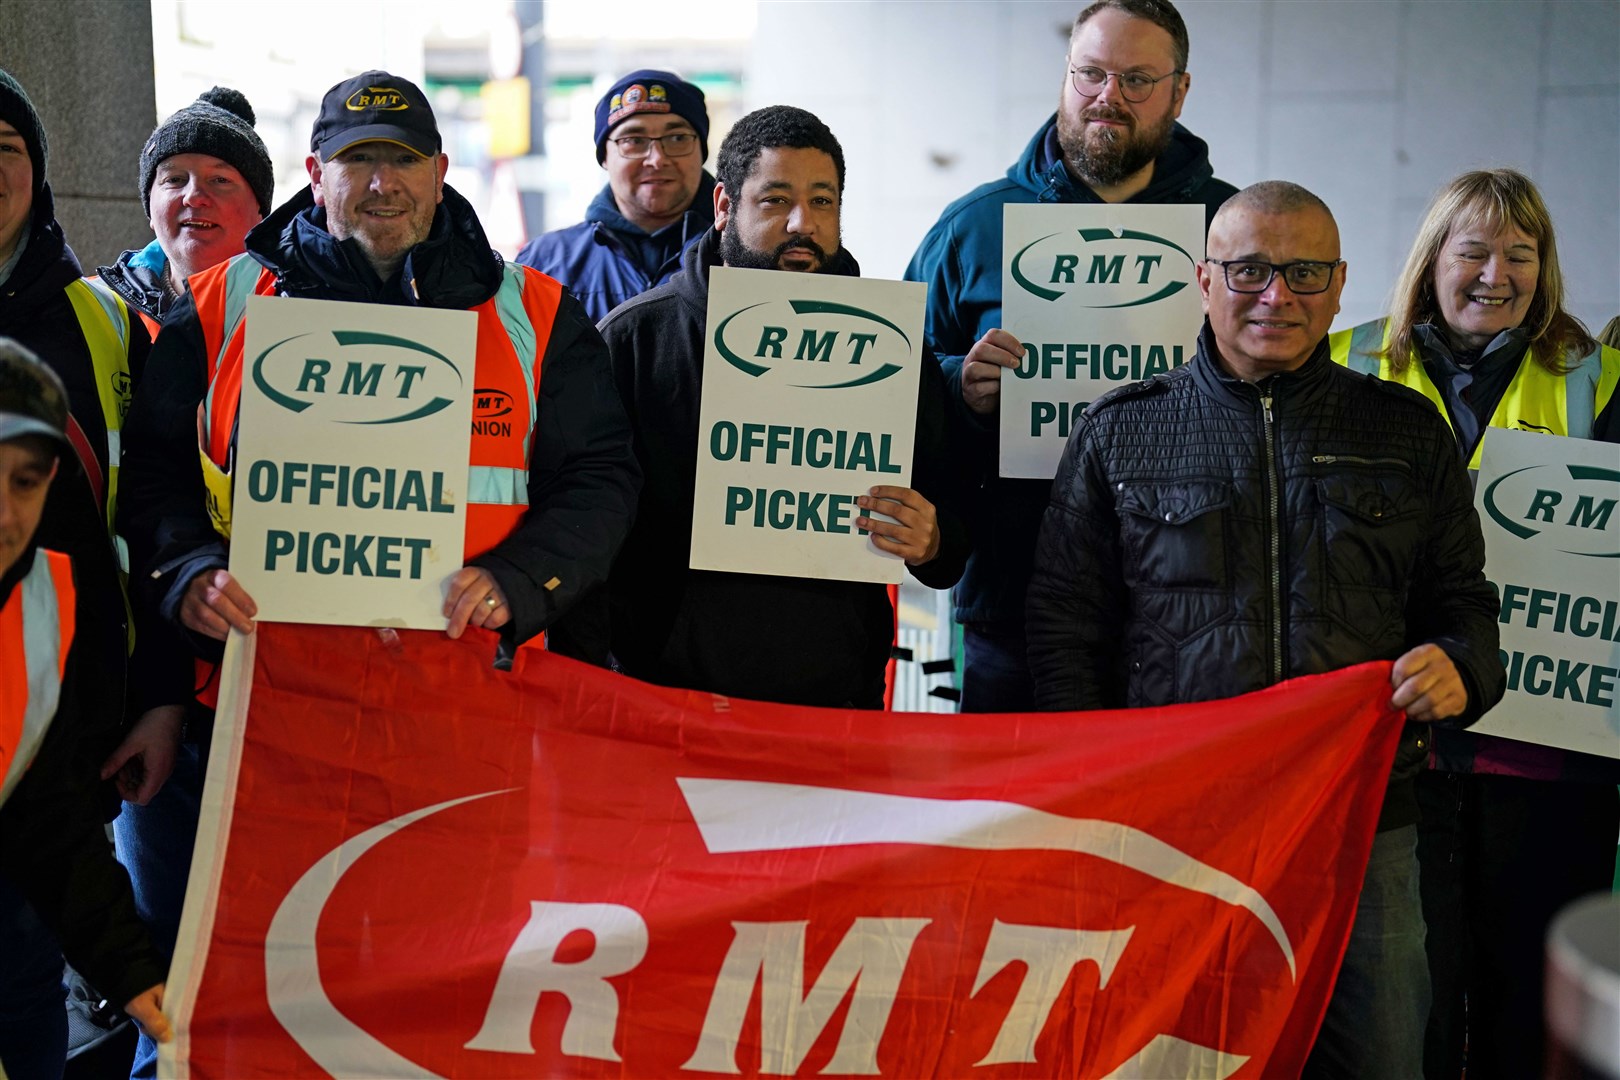 Members of the Rail, Maritime and Transport union (RMT) on the picket line outside New Street station in Birmingham during a rail strike in a long-running dispute over jobs and pensions. P(Jacob King/PA)